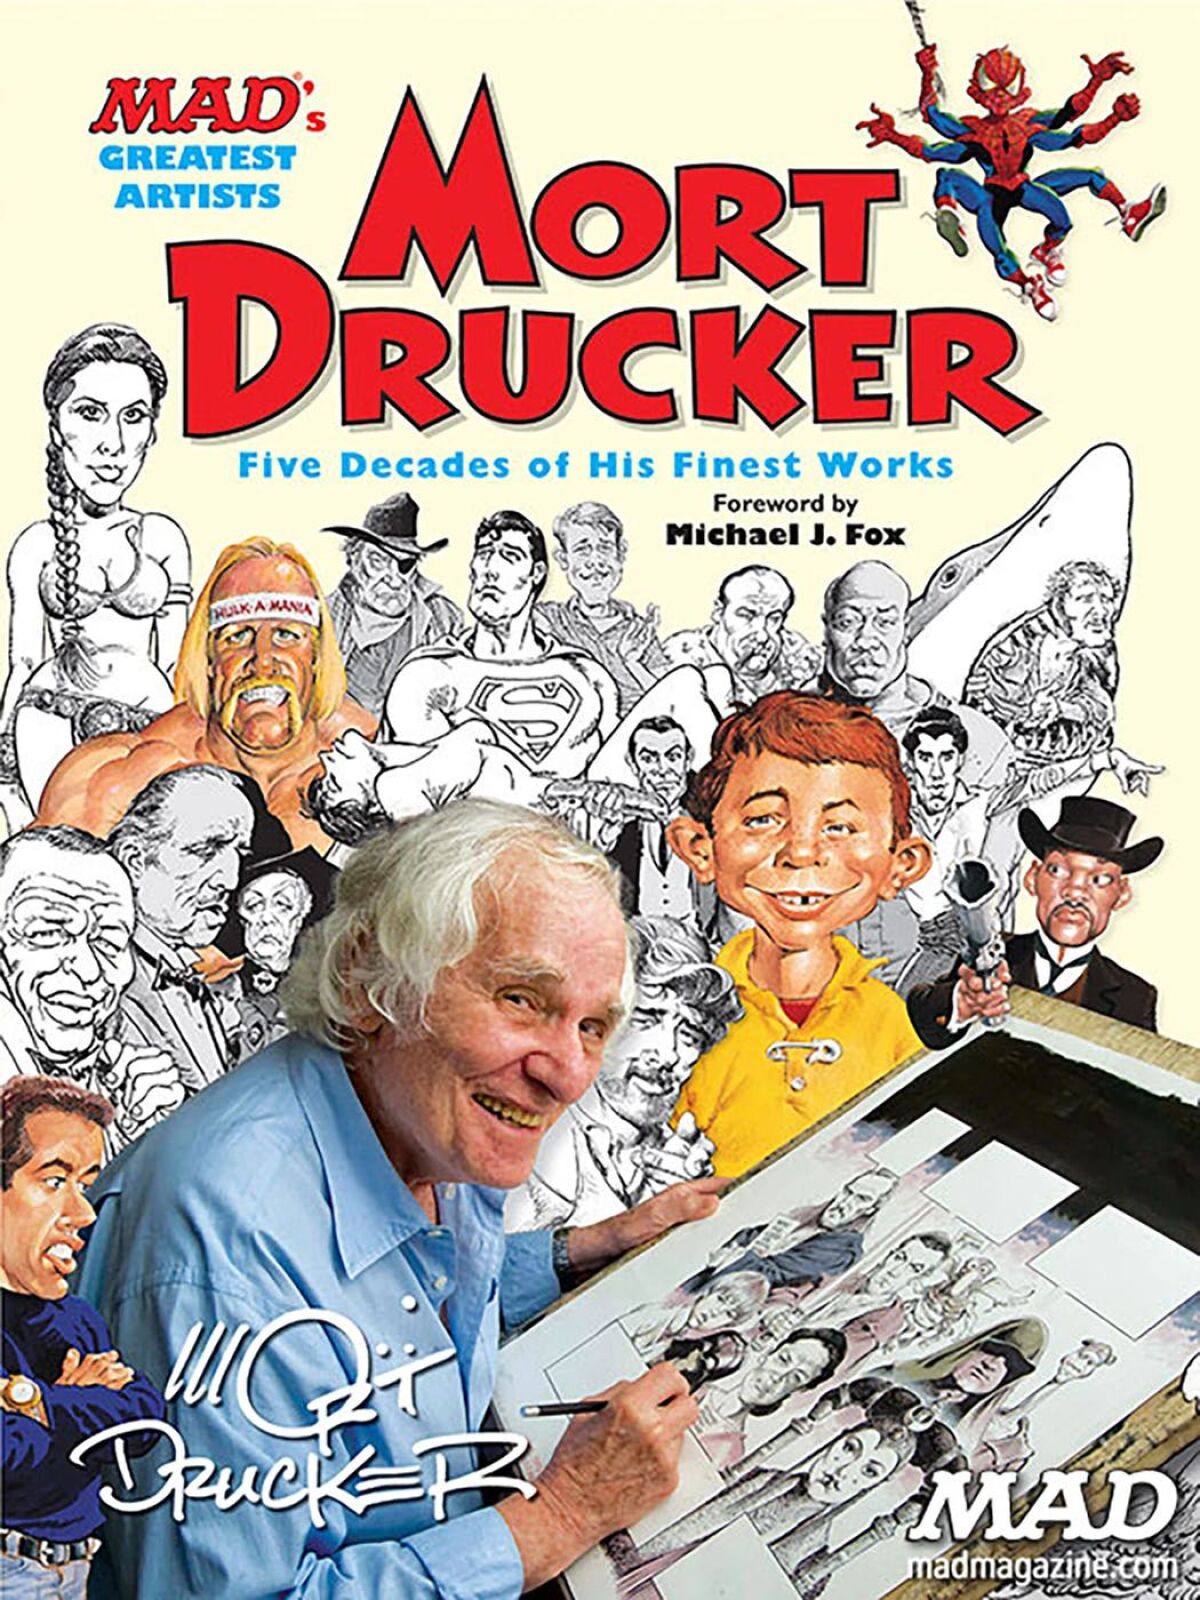 New York City native Mort Drucker joined Mad in the mid-1950s, and remained well into the 21st century.